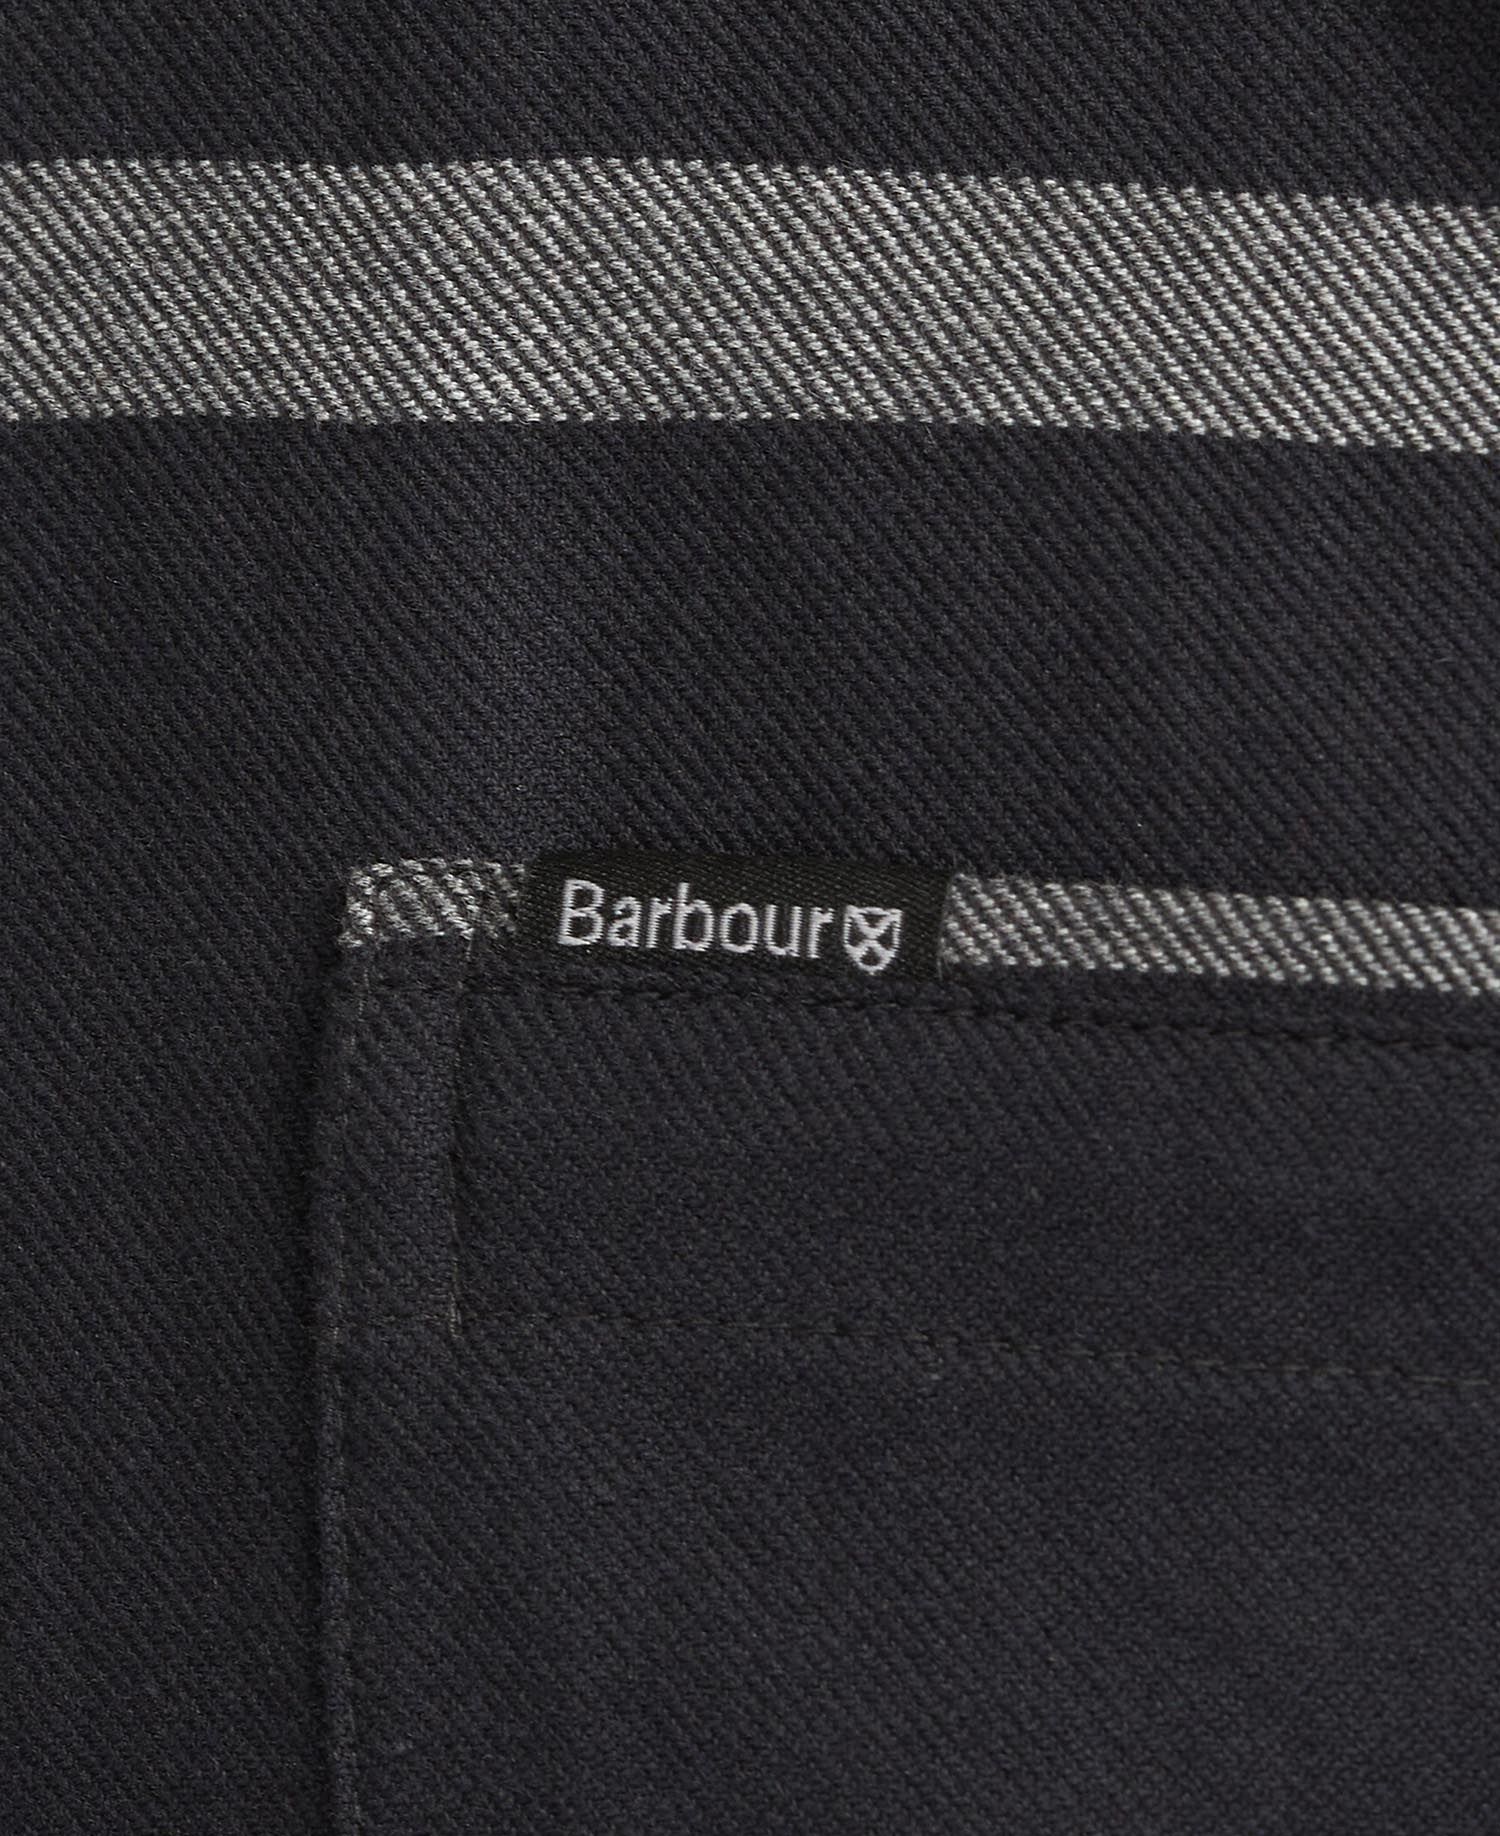 BARBOUR DUNOON TAILORED SHIRT - GRAPHITE - Aston Bourne